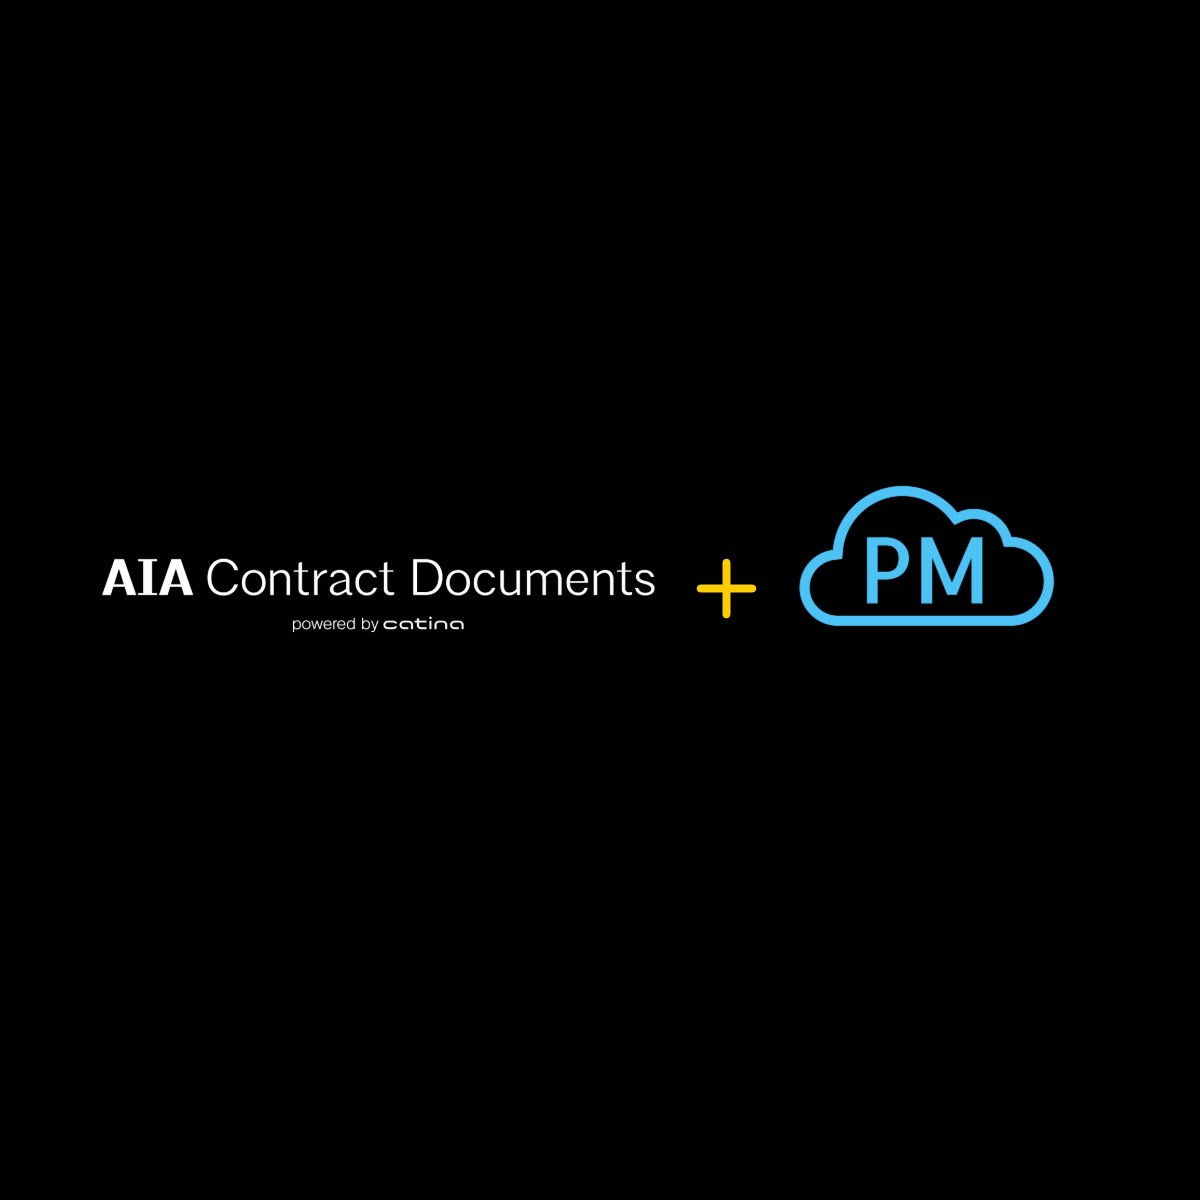 🚀 Partnership Alert! Cloud PM is now officially teamed up with #AIAcontracts. Learn more: bit.ly/3VCPSAF #FinancialManagement #ConstructionManagement